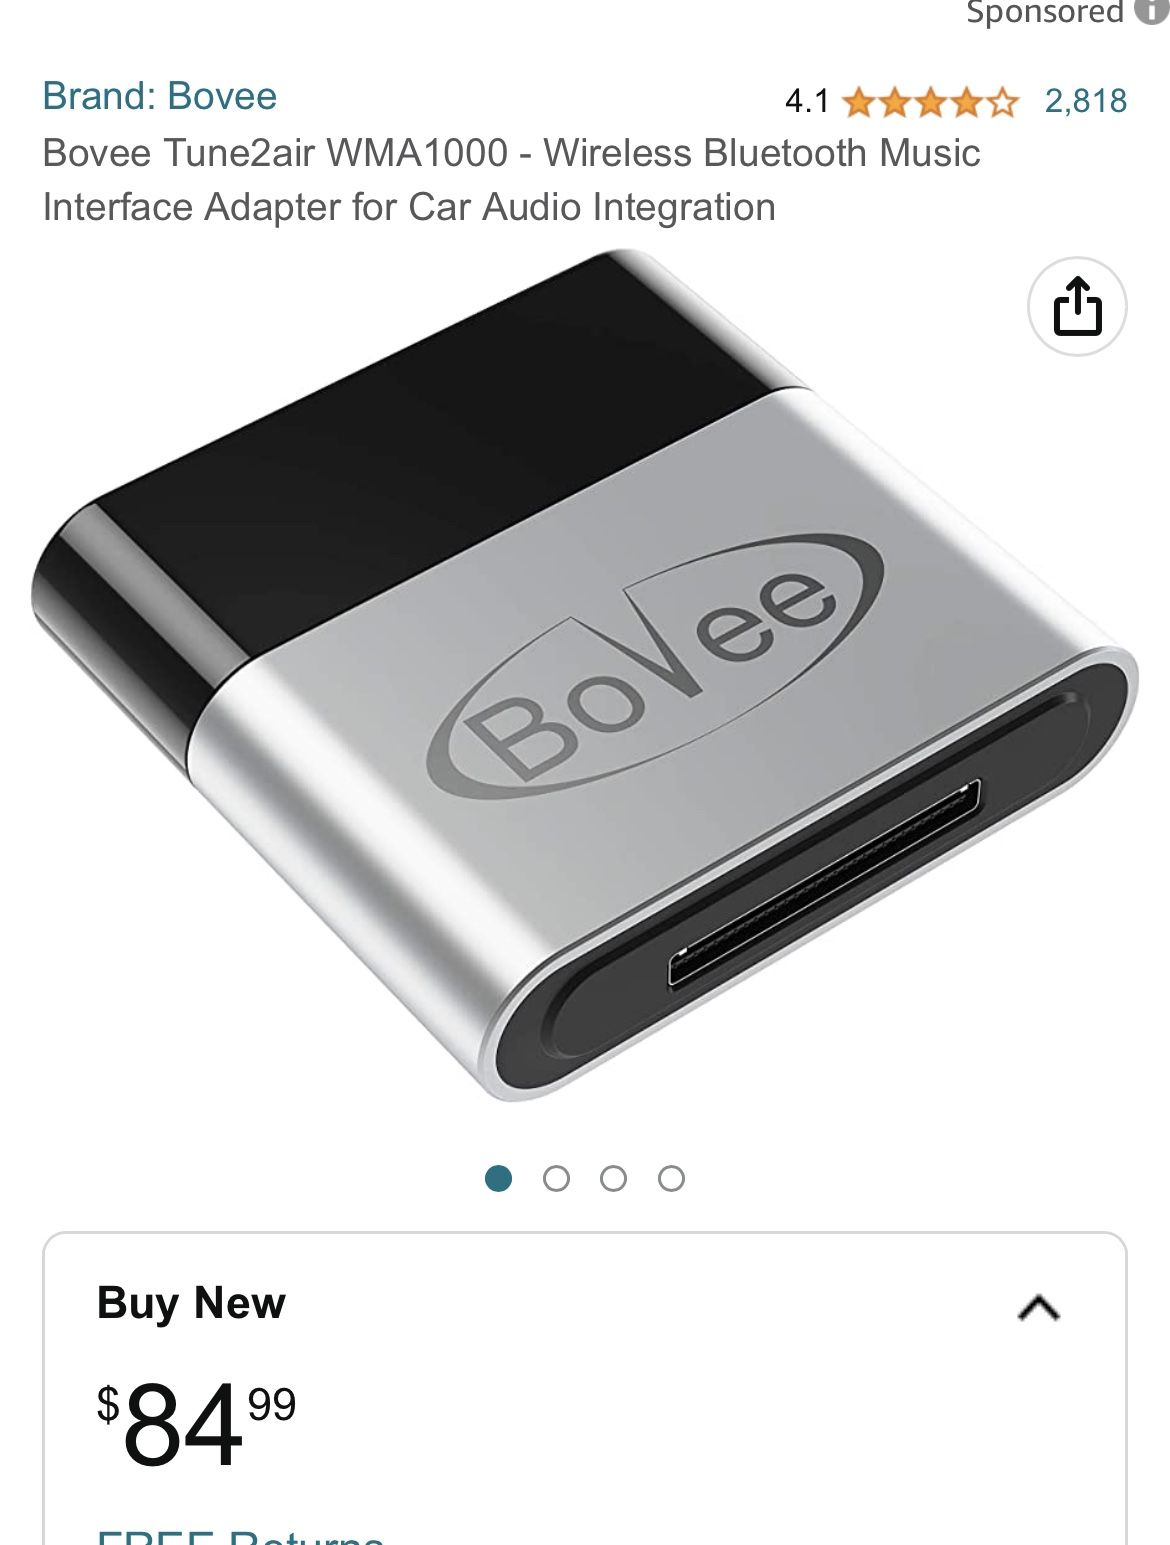 Bovee 1000 - Wireless Music Interface Adaptor Compatible with Audi